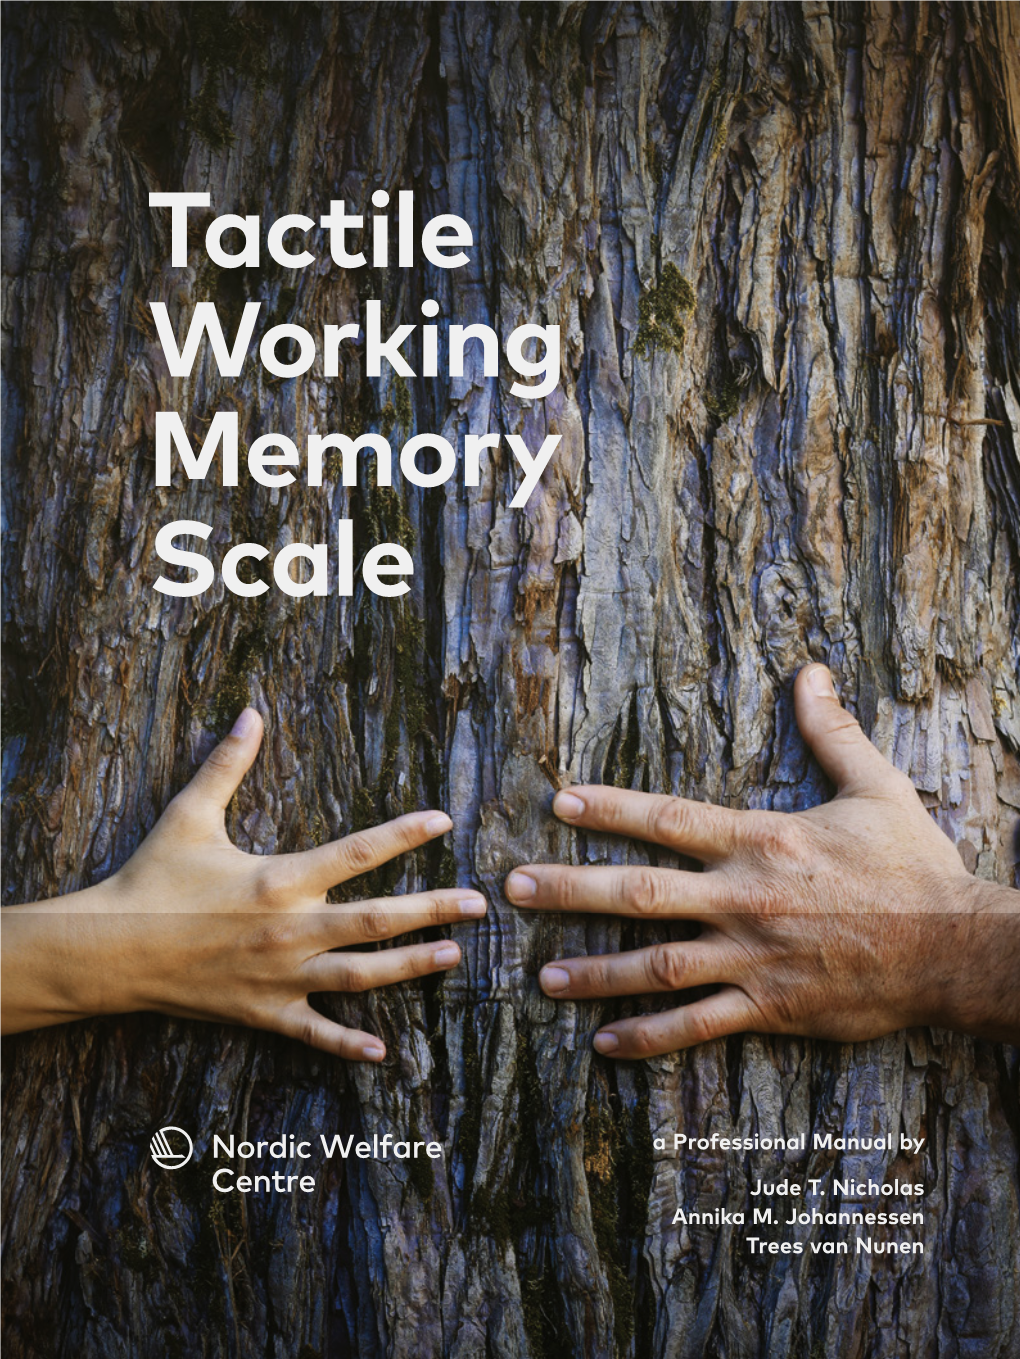 Tactile Working Memory Scale